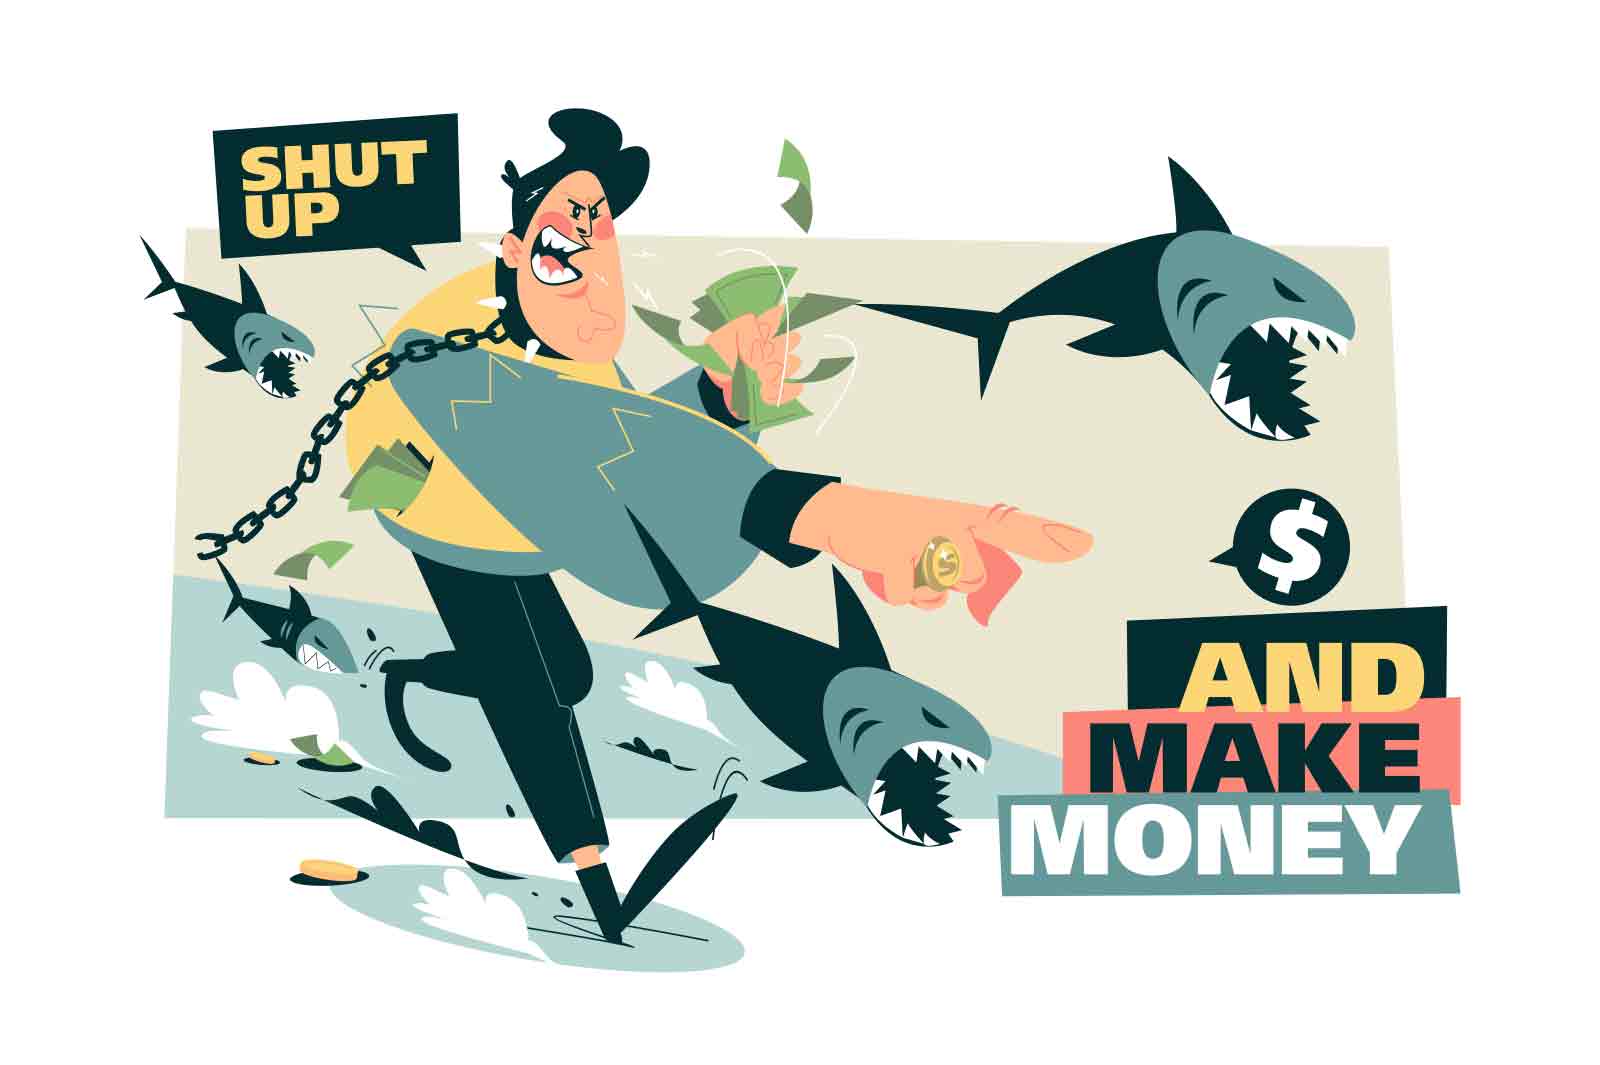 Business shark, shut up and make money vector illustration. Successful business strategy flat style concept. Earn money or increase income